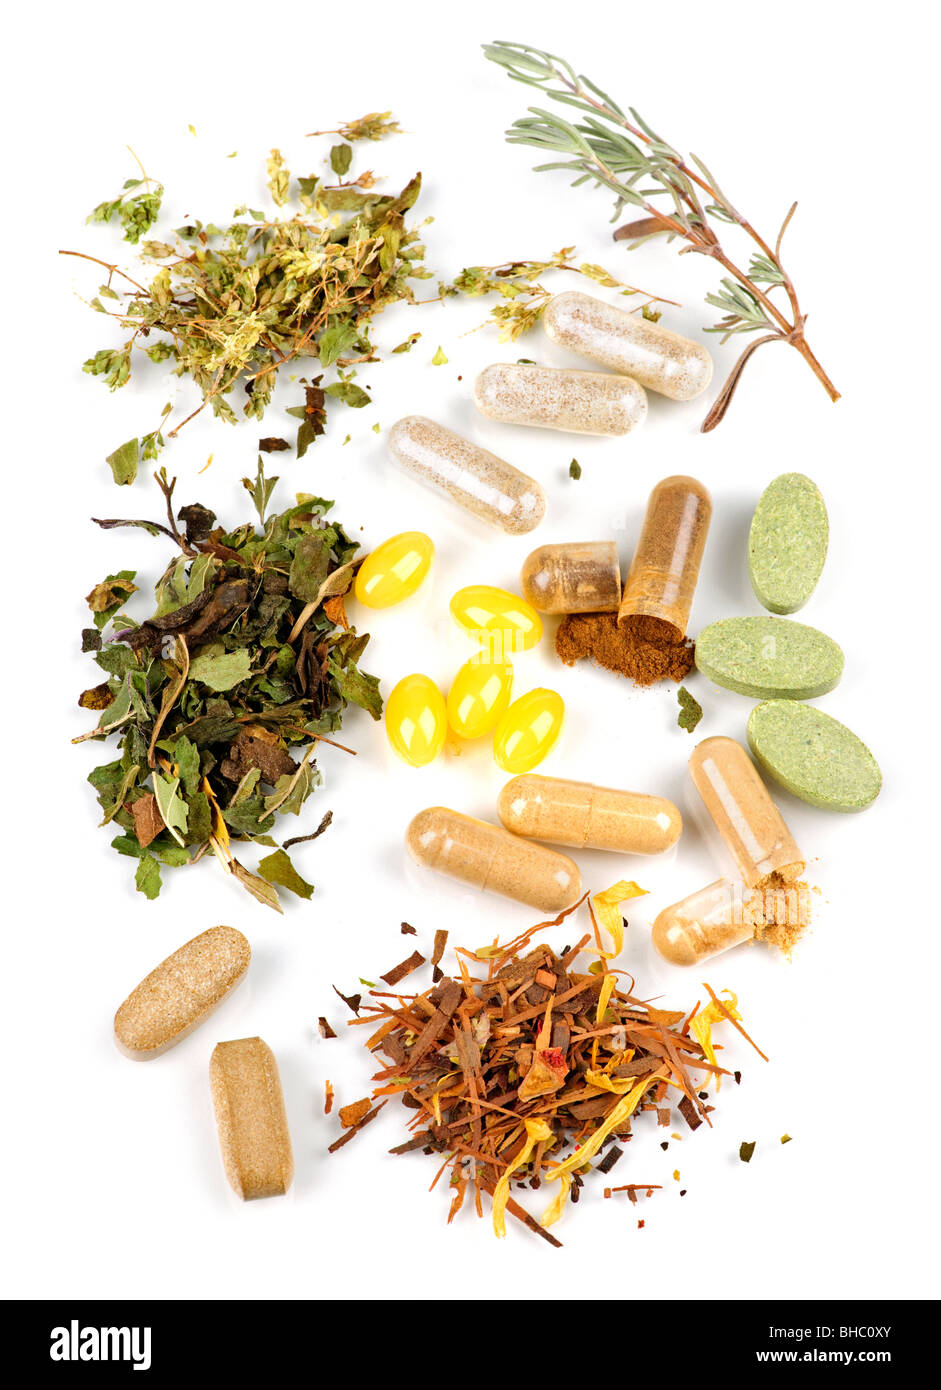 Herbs, herbal supplements and vitamin pills on white background Stock Photo